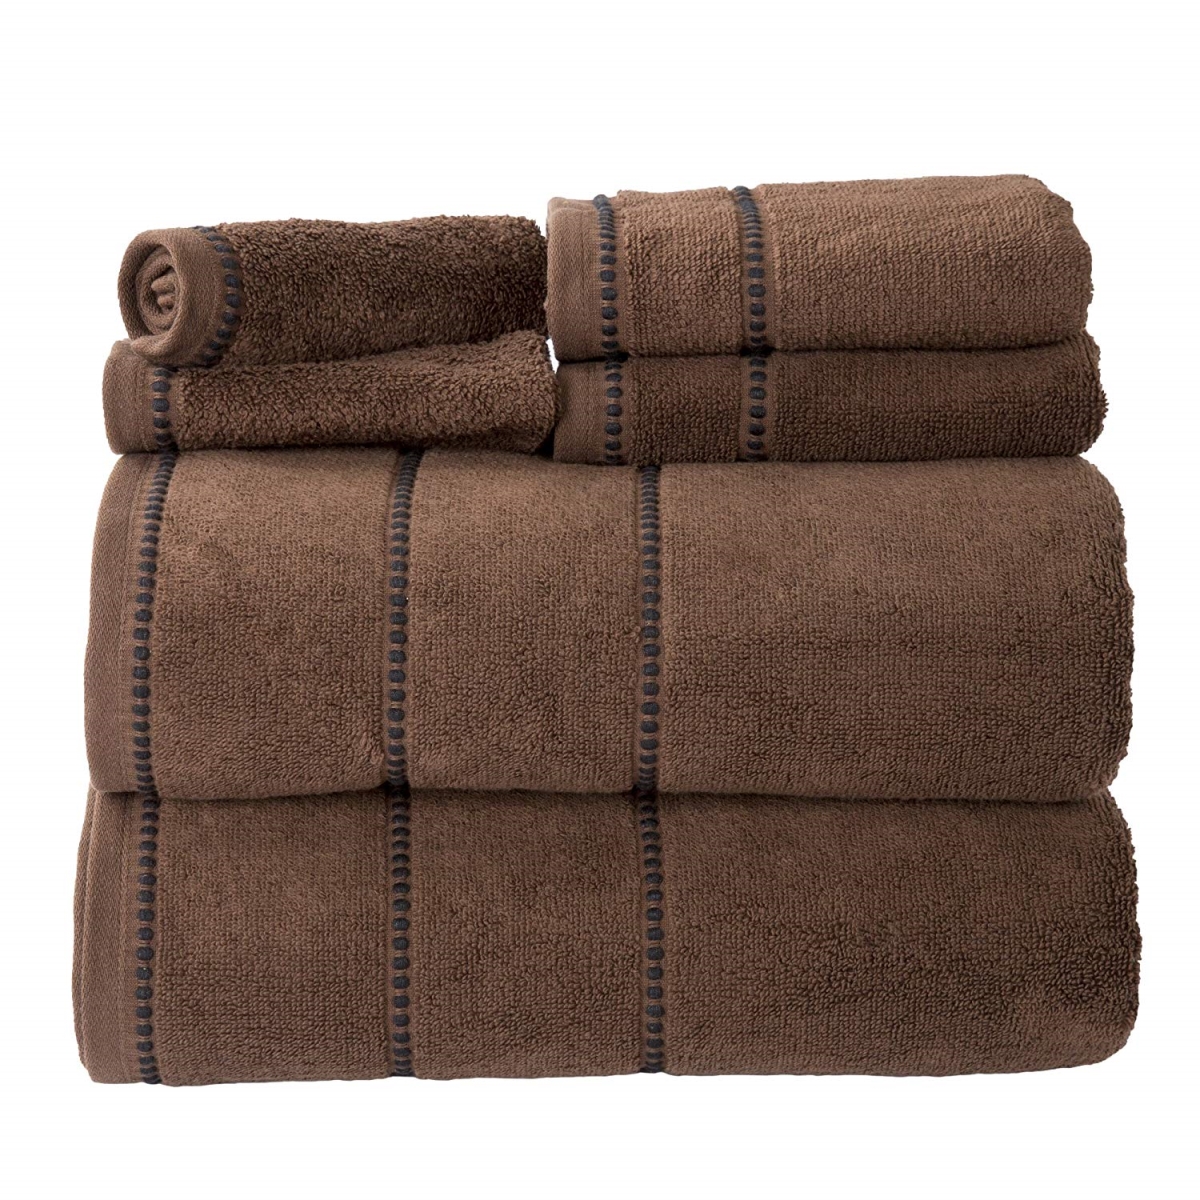 Picture of Bedford Home 67A-76900 Quick Dry 100 Percent Cotton Zero Twist 6 Piece Towel Set - Chocolate